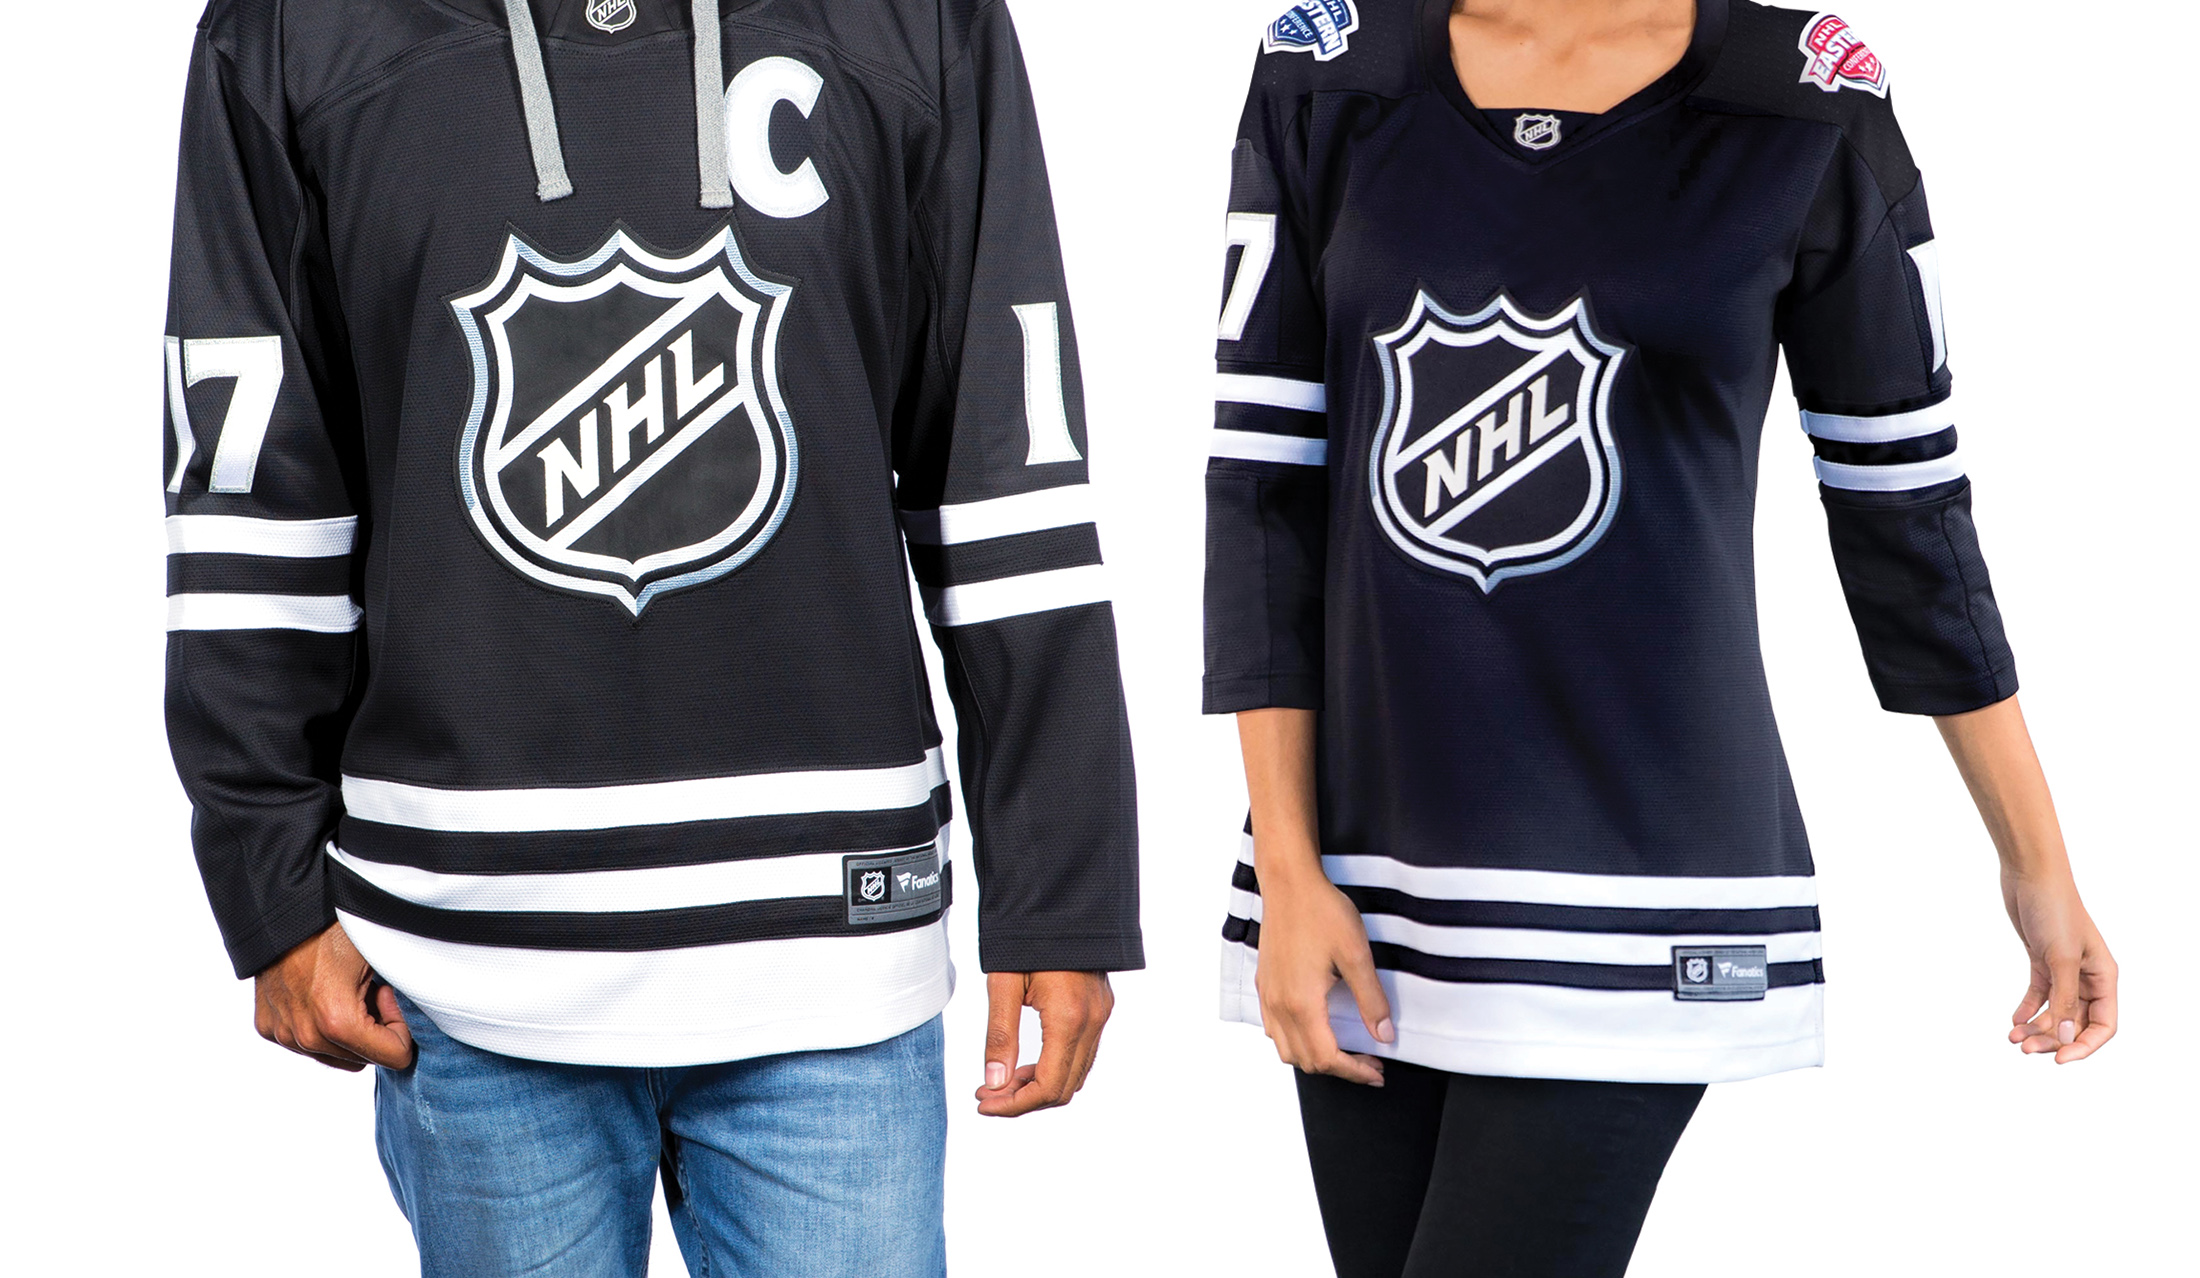 REPORT: Florida 'Vice' Jerseys Coming to NHL All-Star Weekend